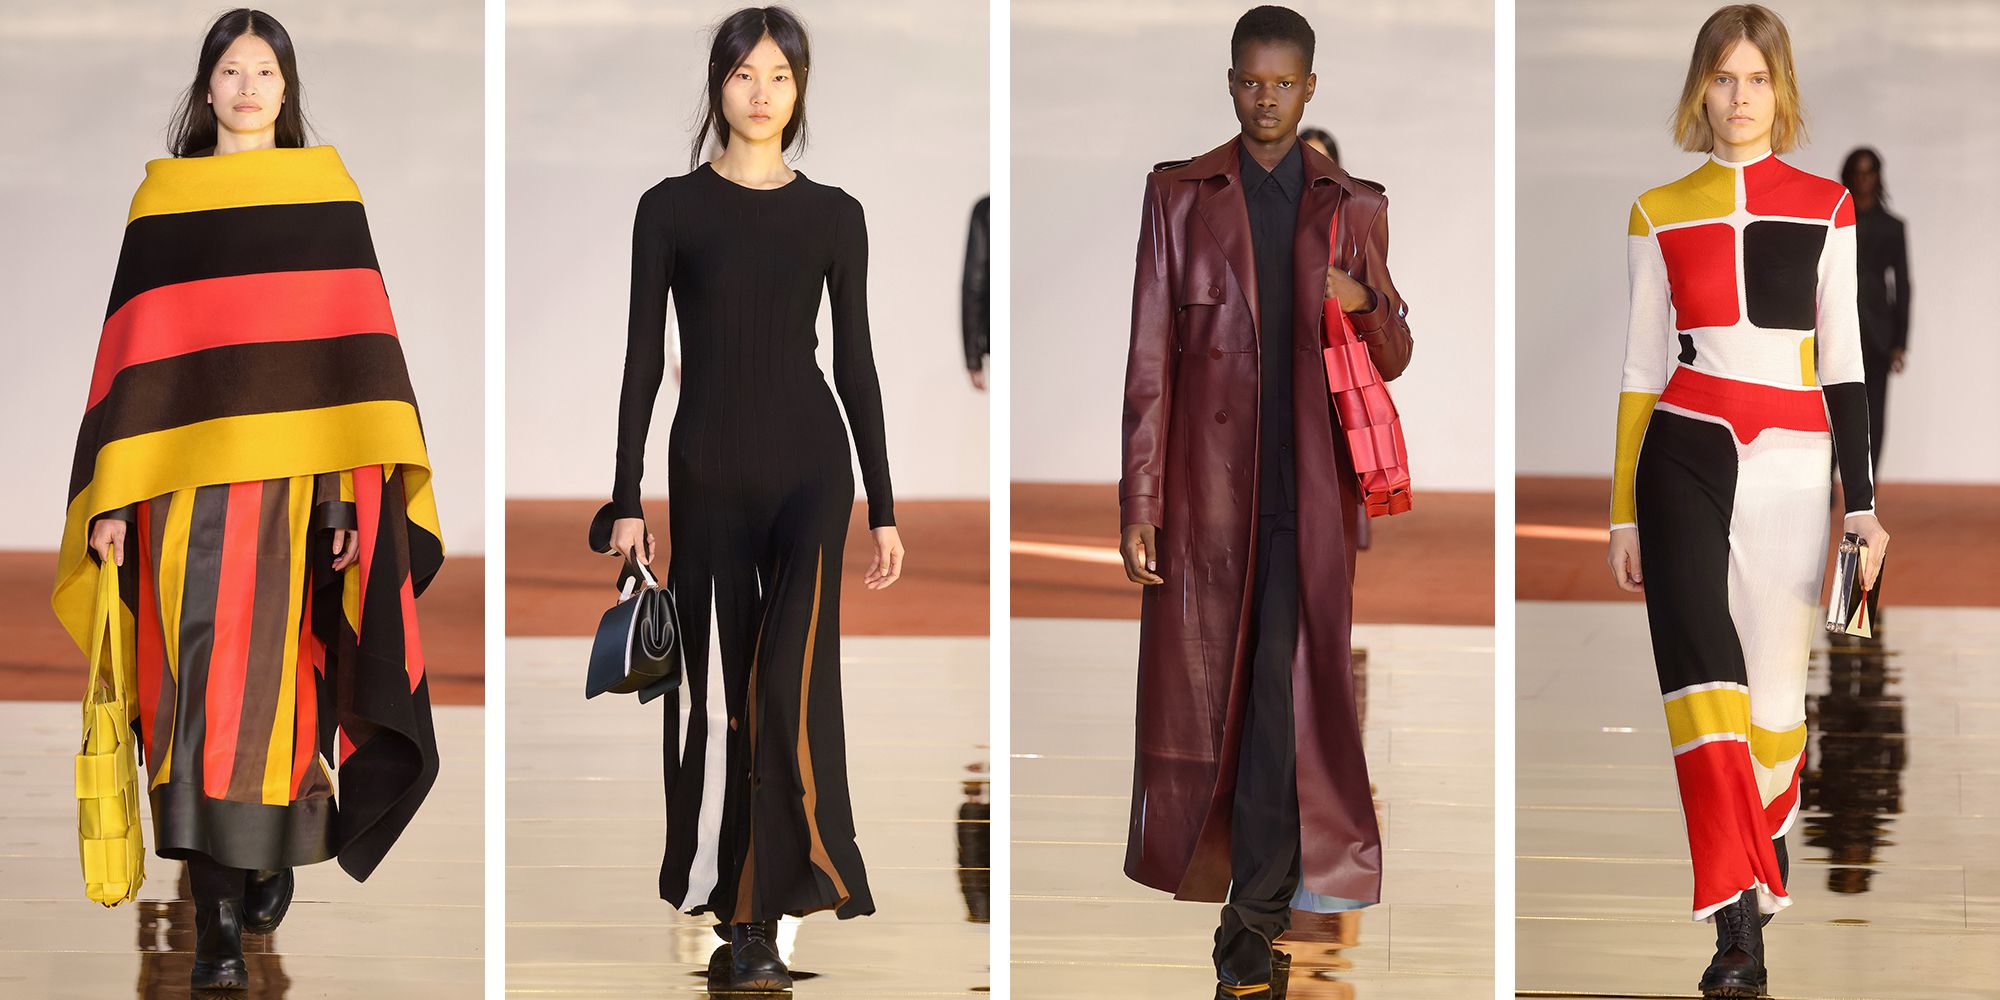 Gabriela Hearst's Fall 2021 Collection Was Inspired by Saint